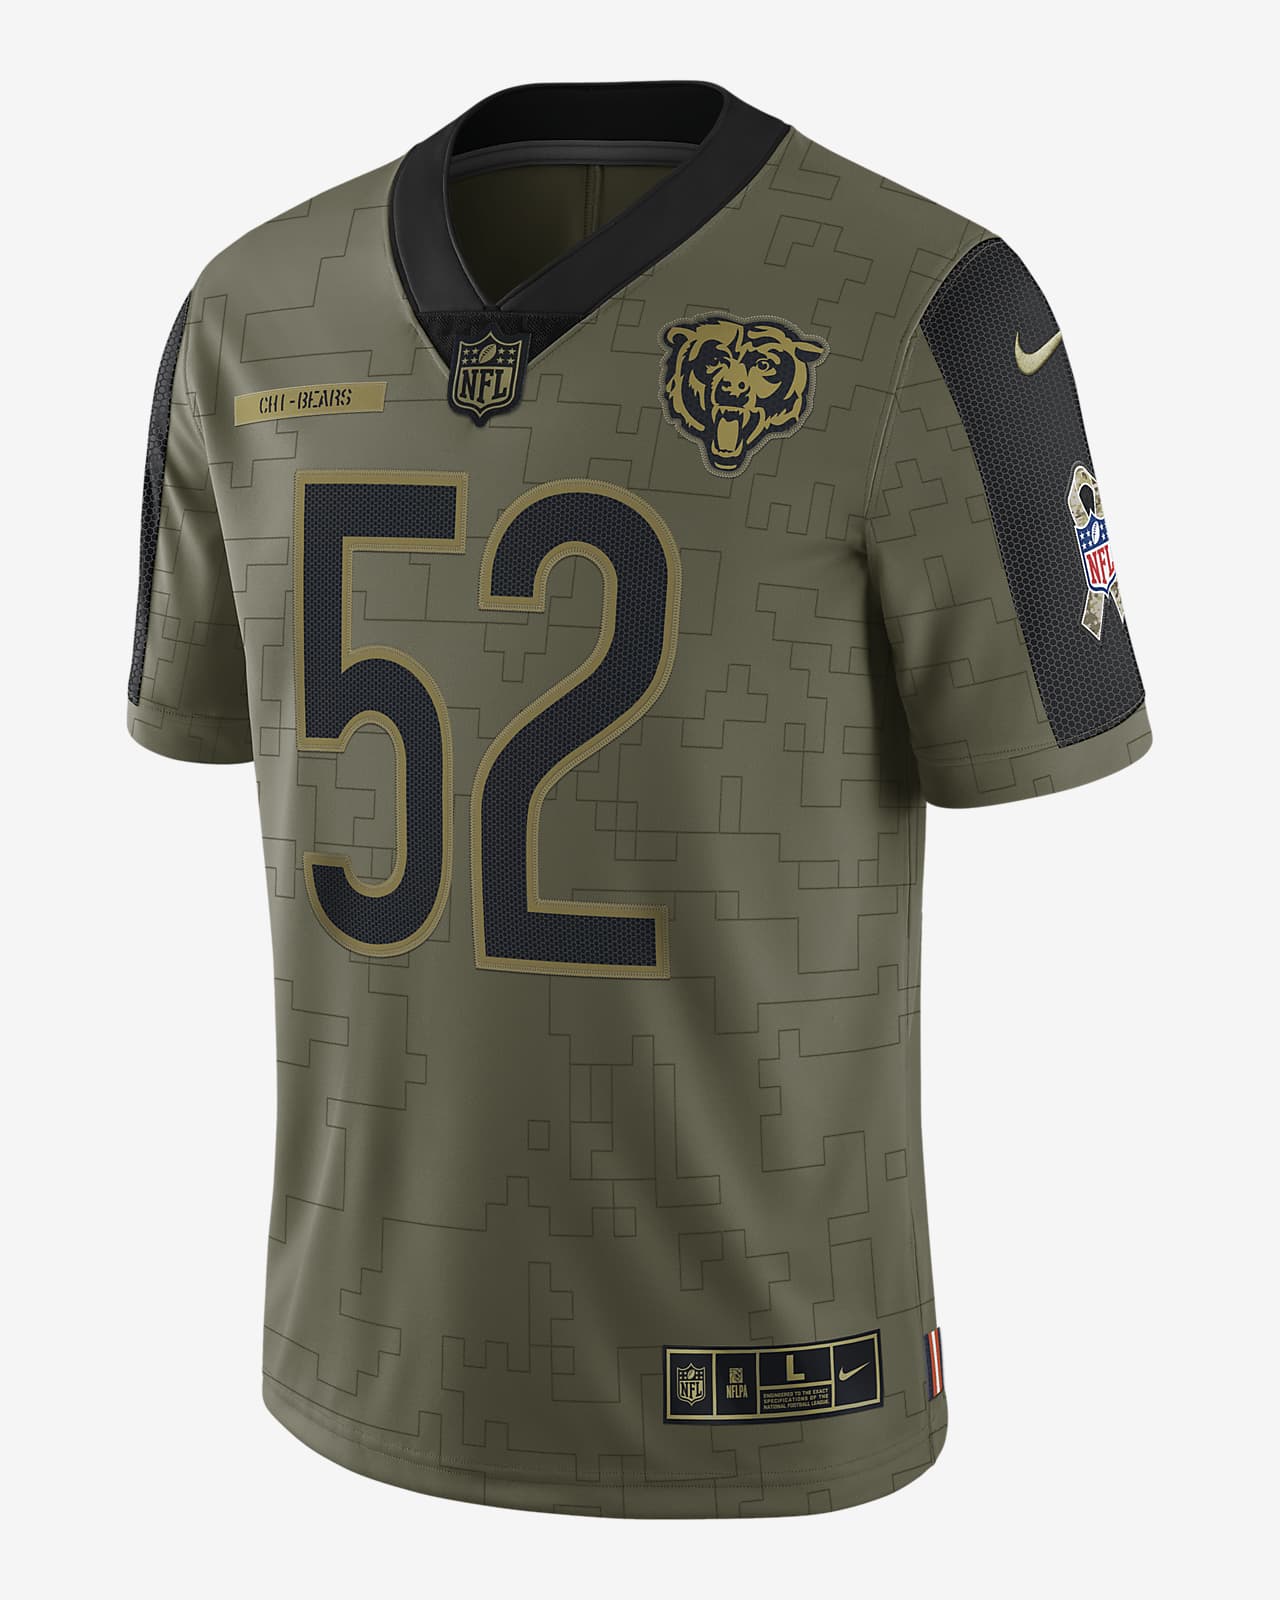 NFL Chicago Bears Salute to Service (Khalil Mack) Men's Limited Football Jersey